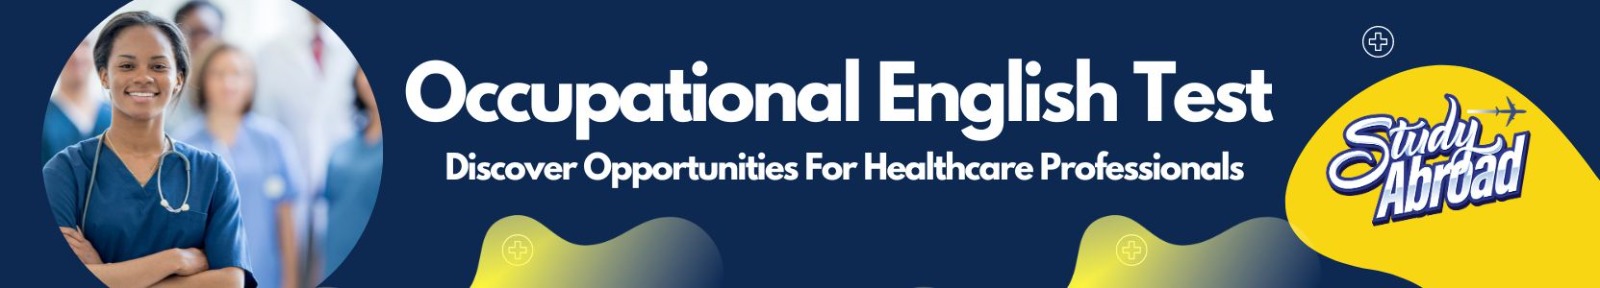 UNLOCKING OPPORTUNITIES: HOW THE OET CAN HELP HEALTHCARE PROFESSIONALS WORK IN THE UK